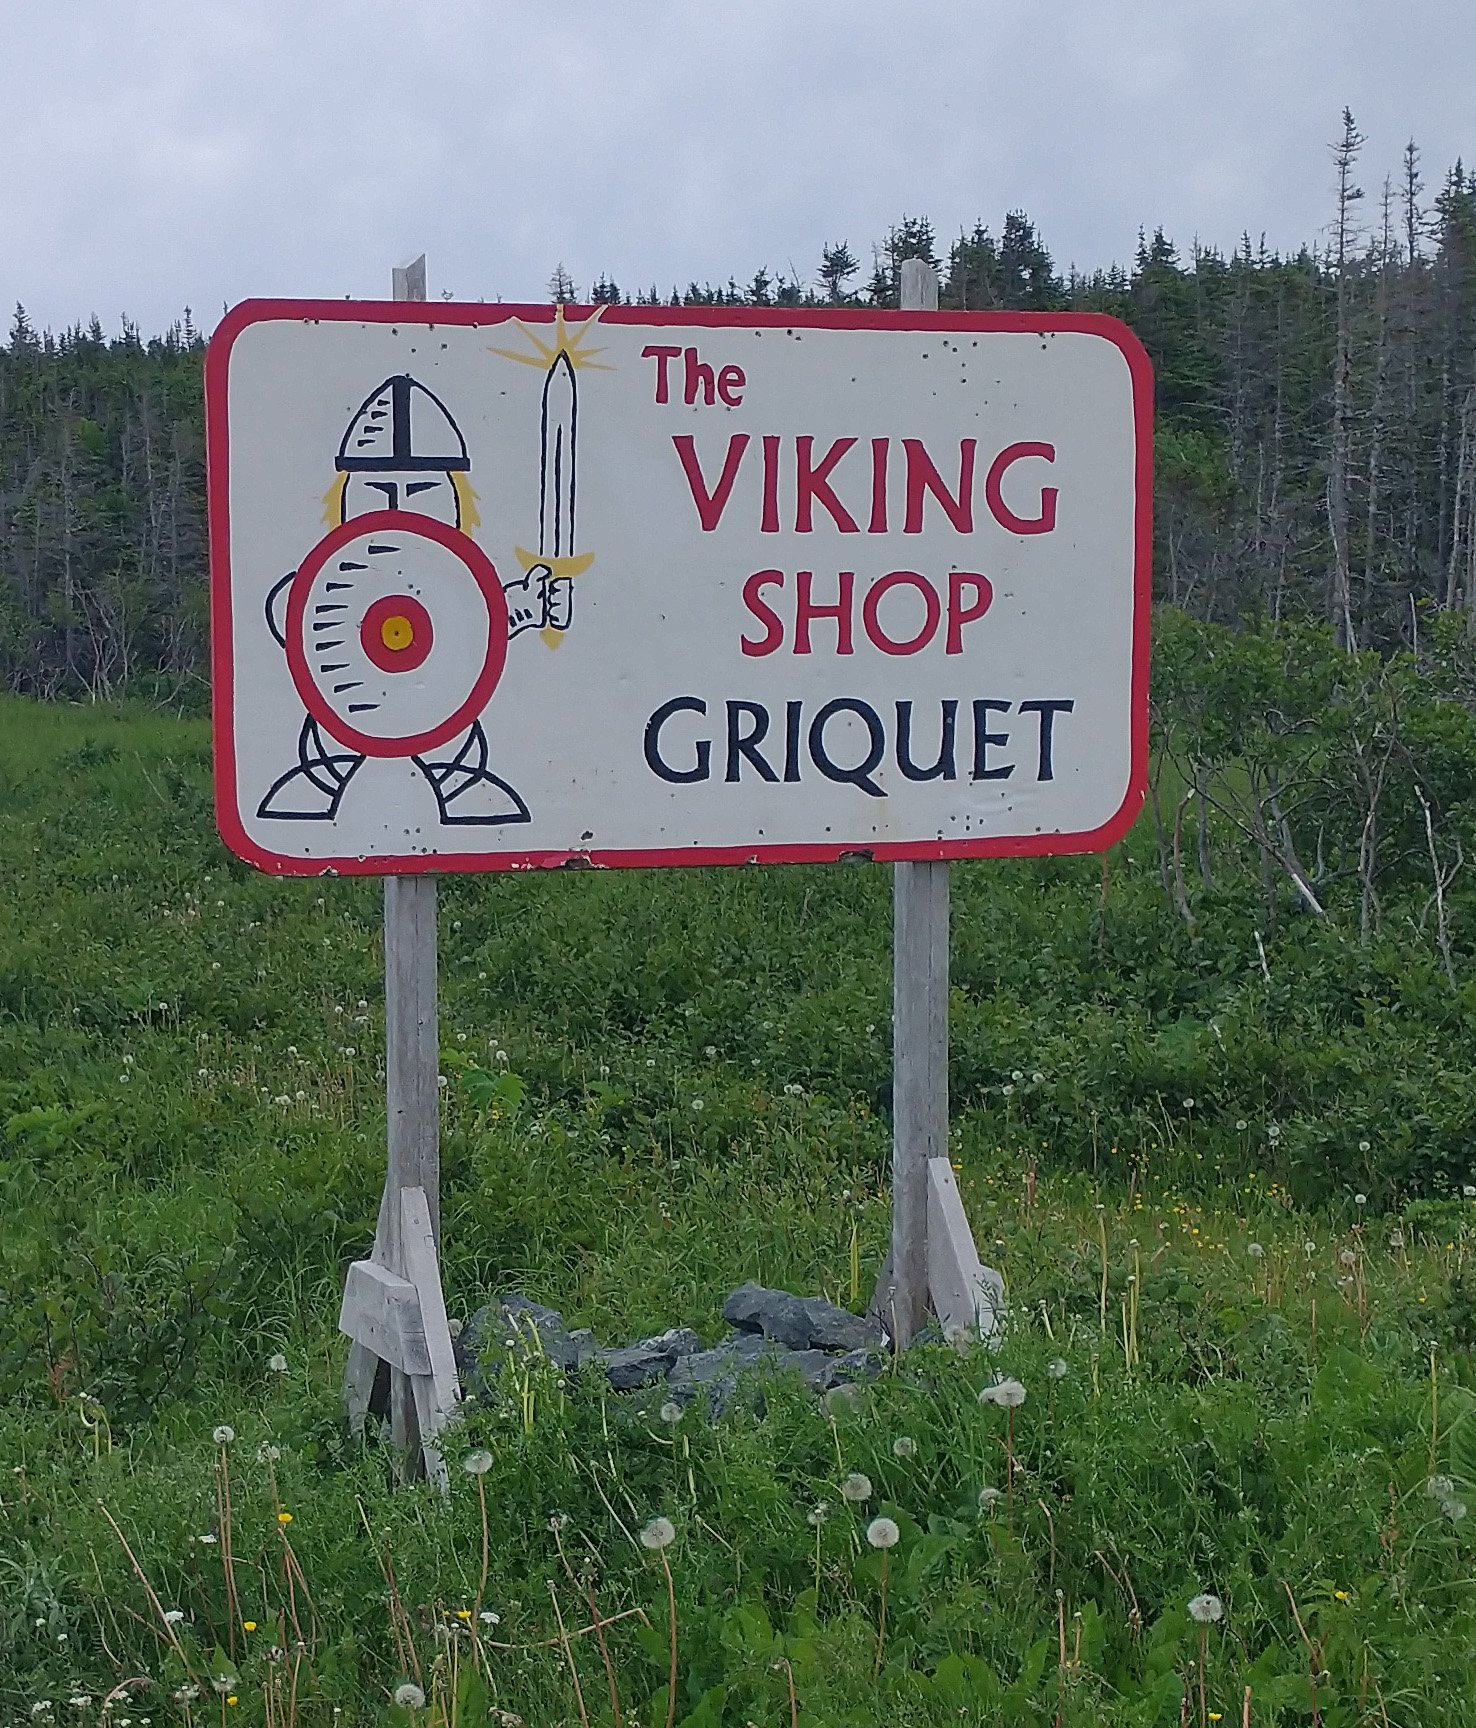 Lot of viking shops and restaurants in the little towns going there.